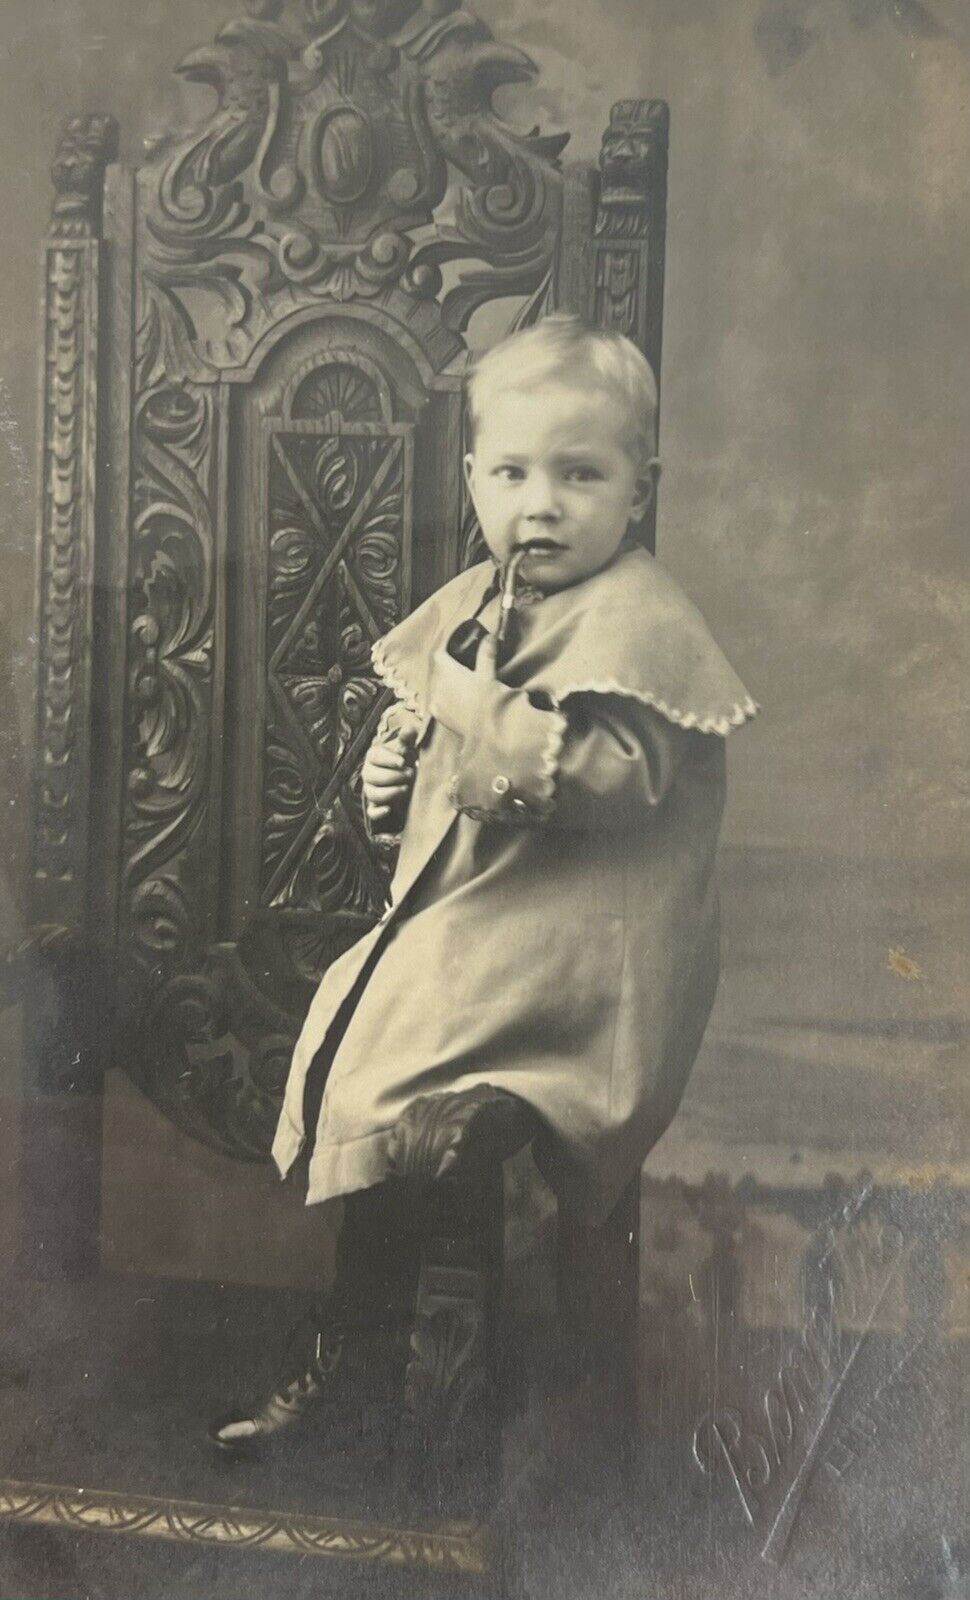 Little Boy In costume￼ with a Smoking Pipe Vintage RPPC Bennett￼